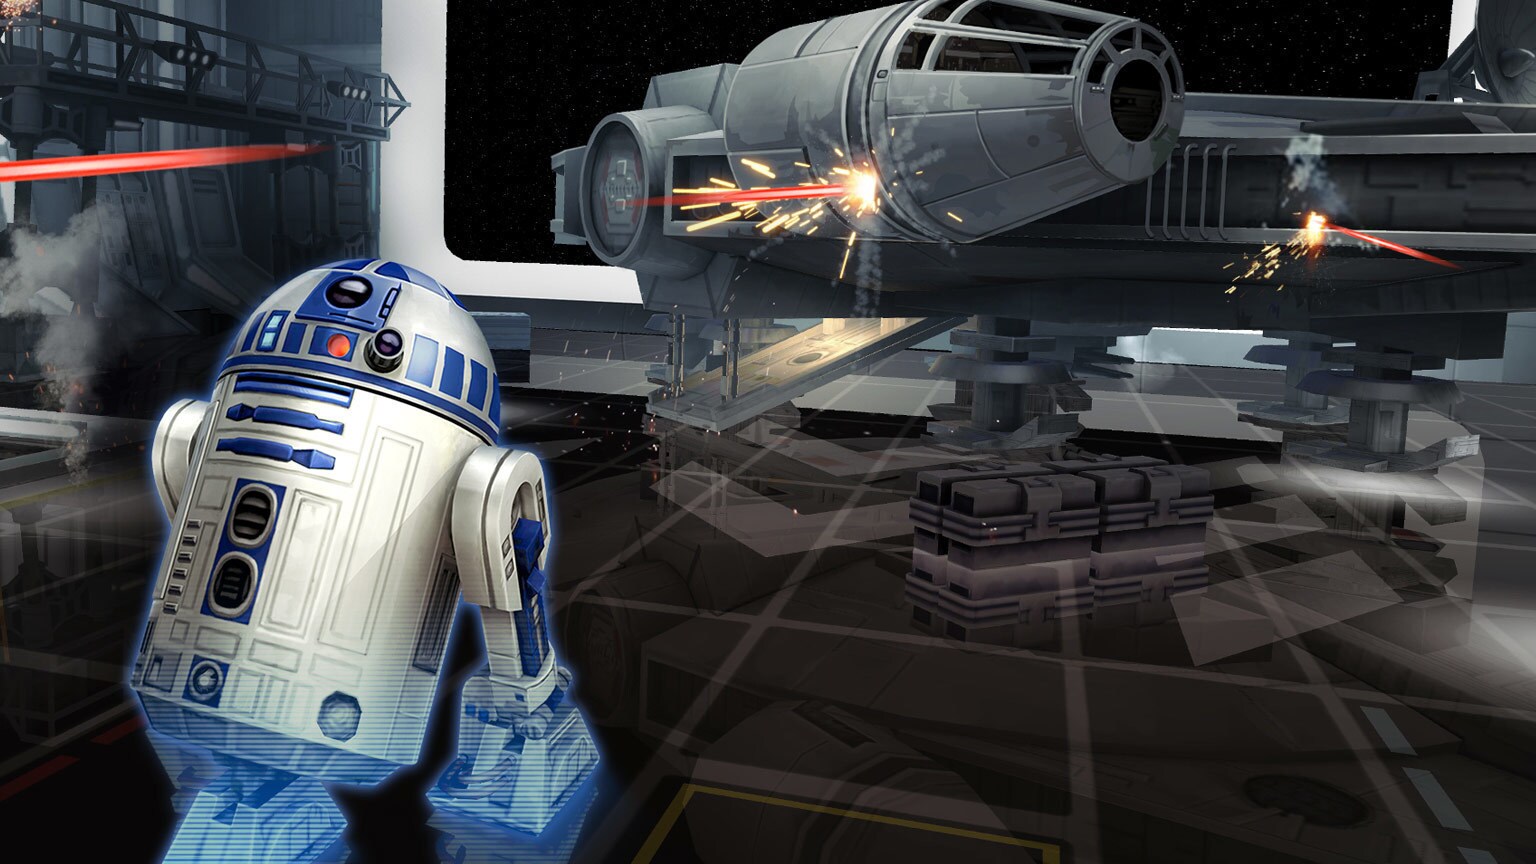 R2-D2 Arrives in Star Wars: Galaxy of Heroes - Exclusive Interview